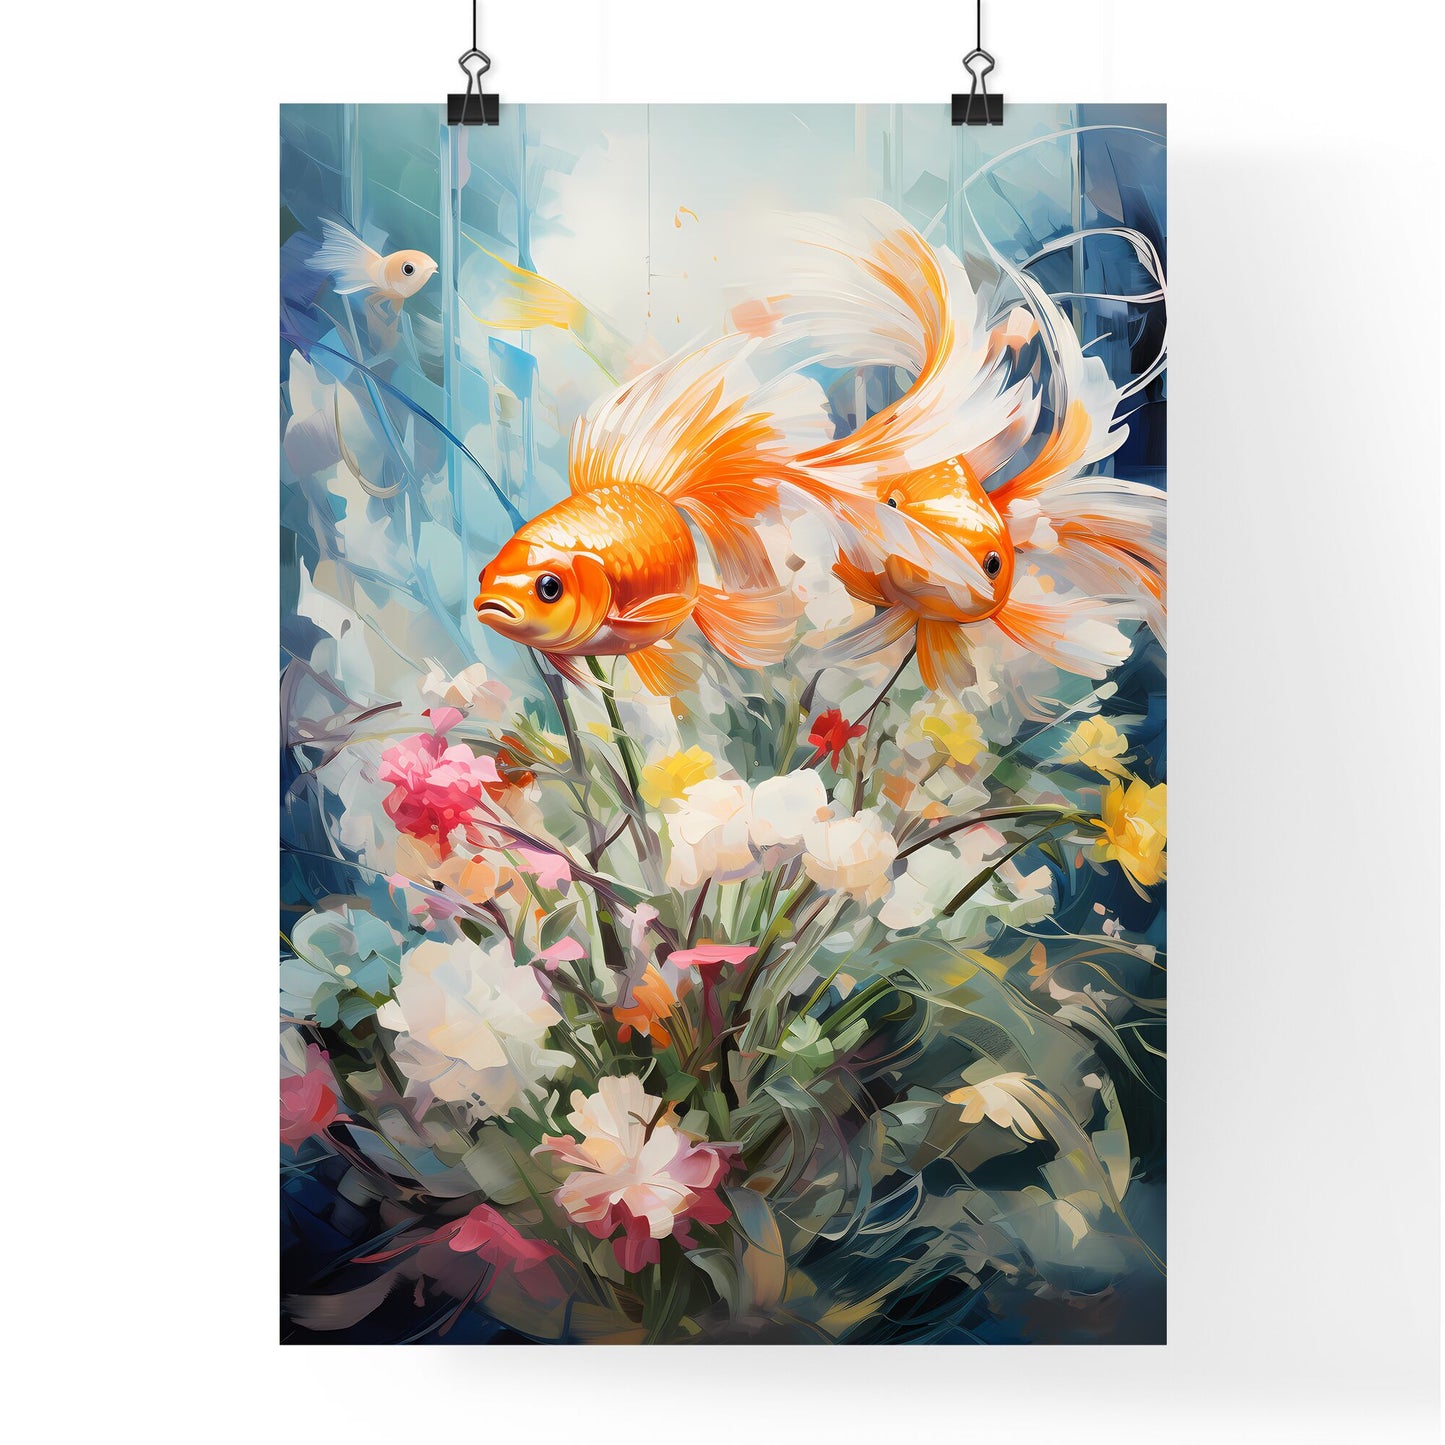 Fish In Aquarium - Two Goldfish In A Bouquet Of Flowers Default Title